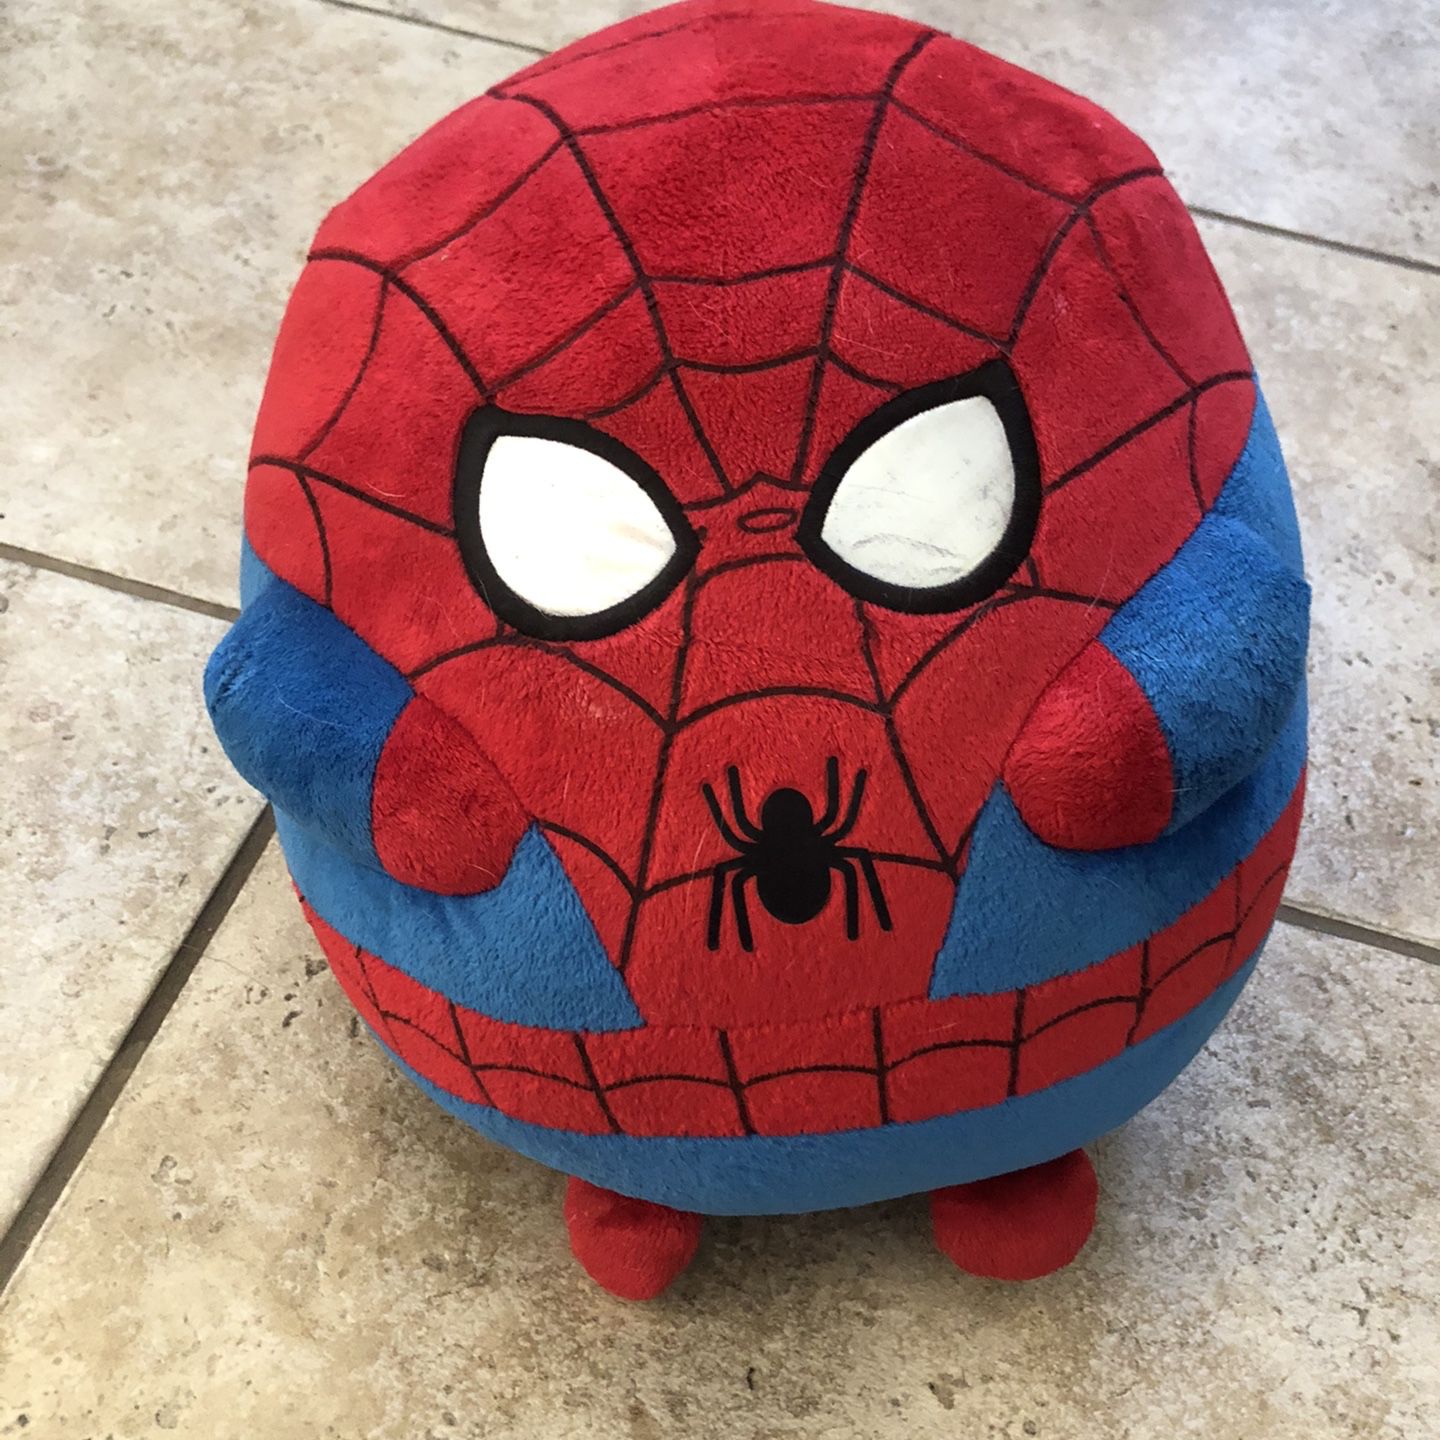 LARGE Fat Spider-Man Plushie for Sale in Oceanside, California - OfferUp